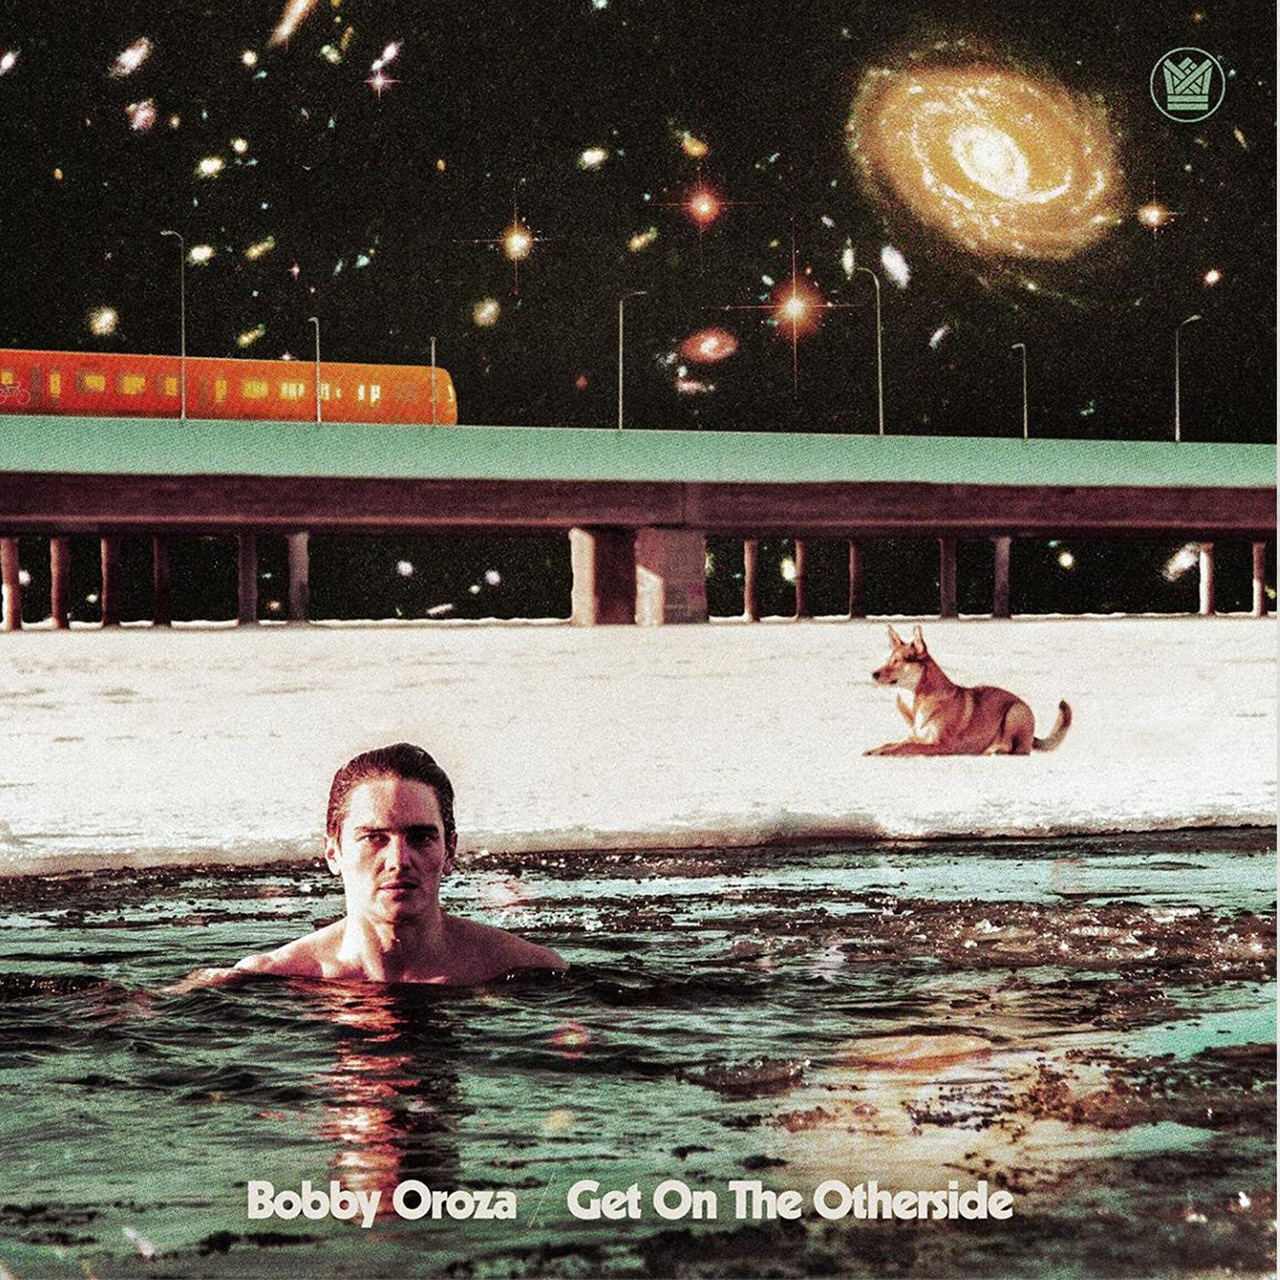 Cover: Bobby Oroza, Get On The Otherside, Big Crown Records/Cargo